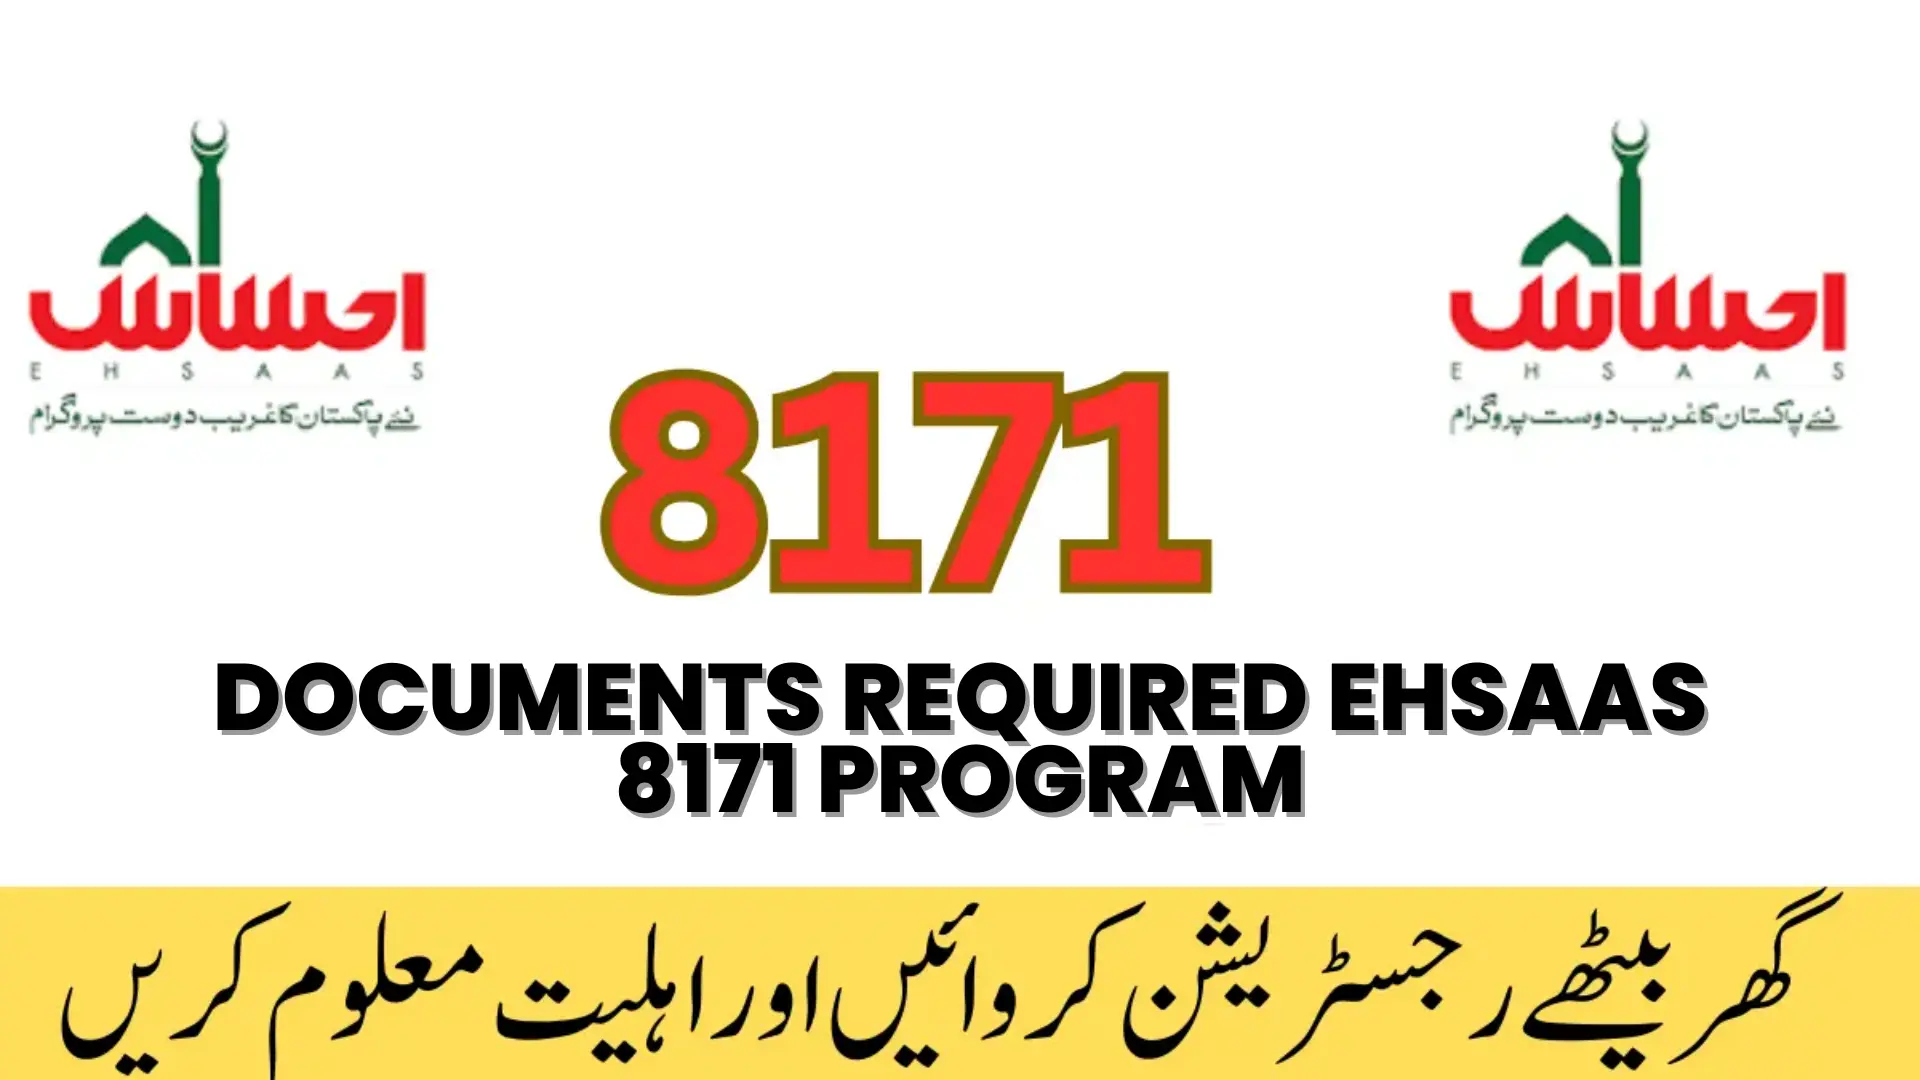 Documents Required Ehsaas 8171 Program